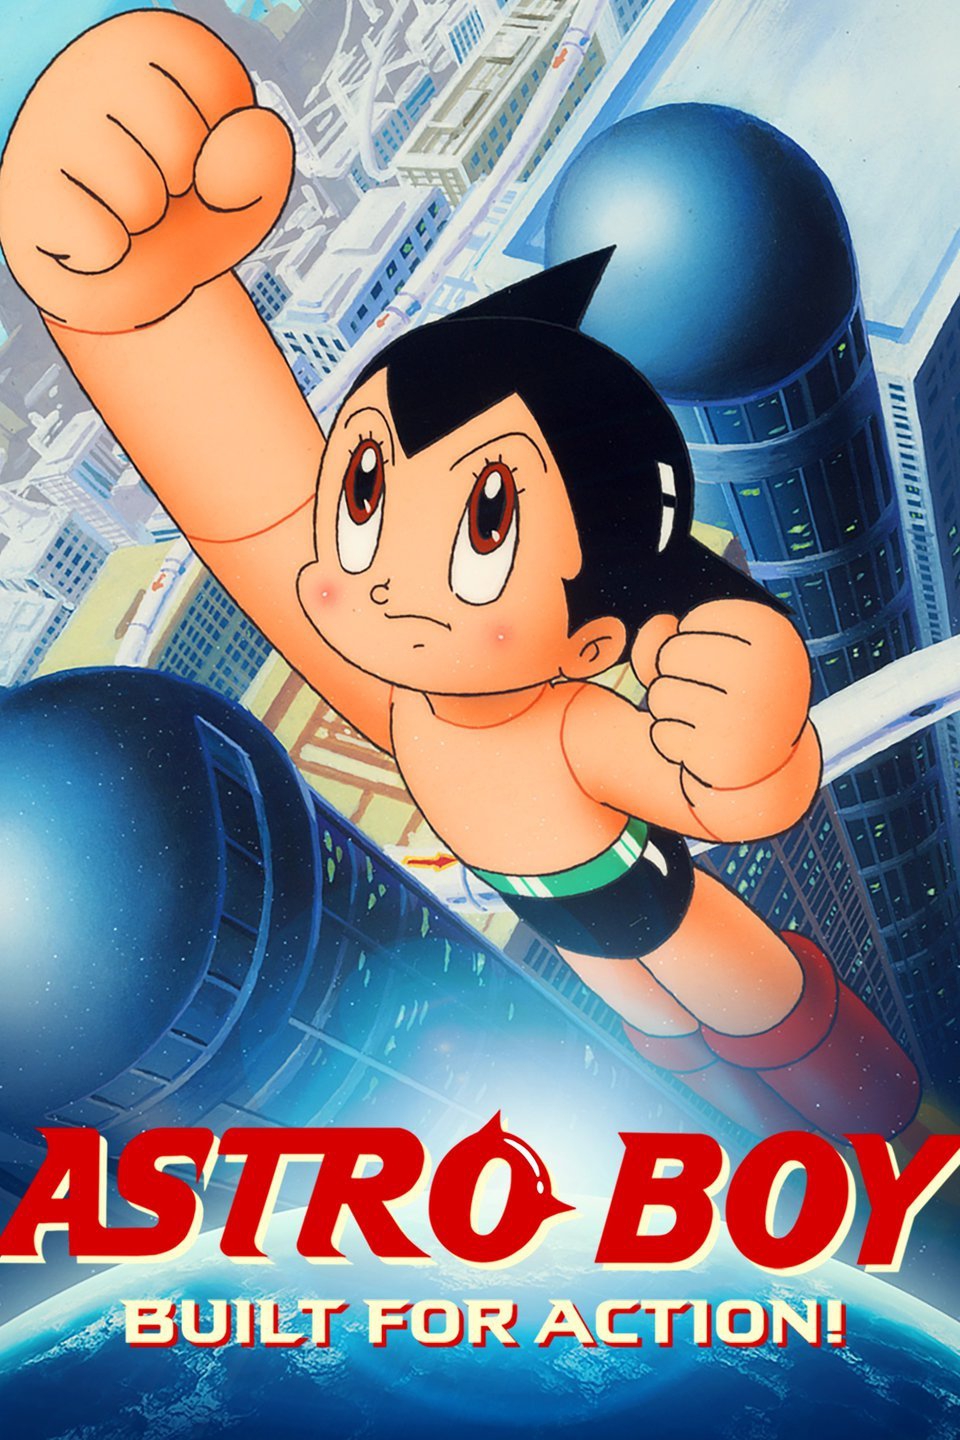 Watch Astro Boy (1980) Online for Free | The Roku Channel | Roku